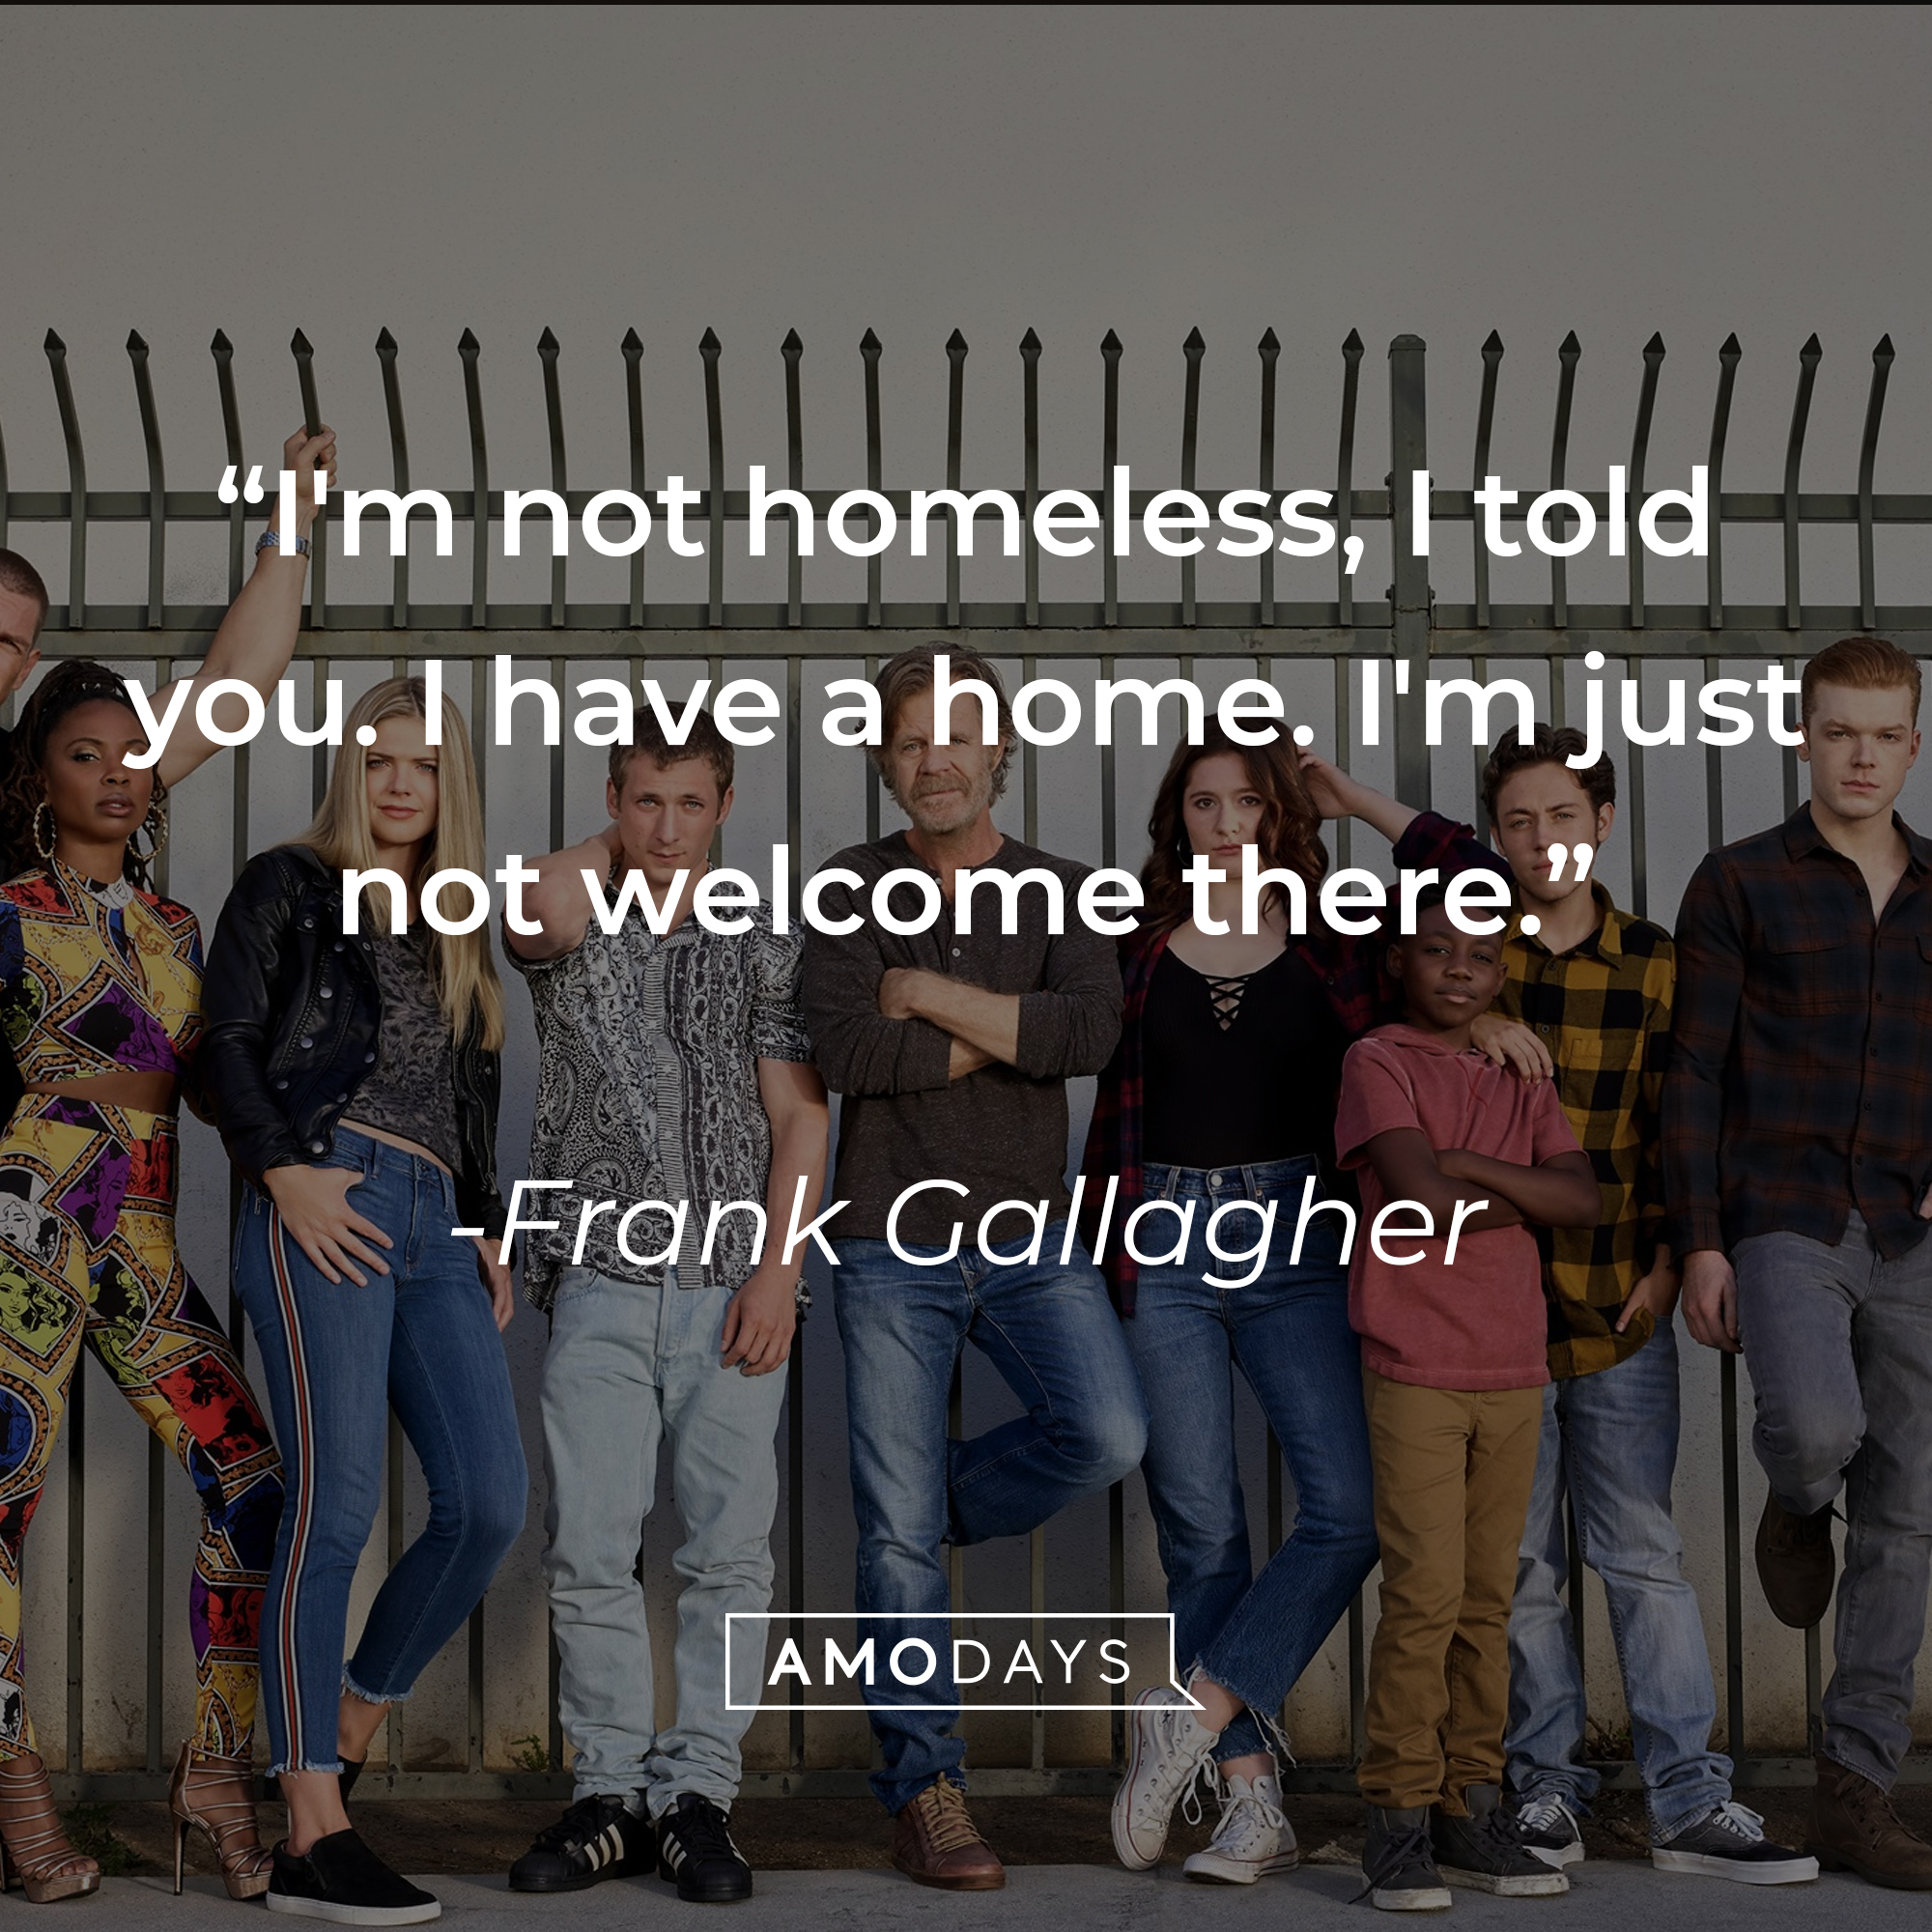 Frank Gallagher's quote: "I'm not homeless, I told you. I have a home. I'm just not welcome there." | Source: facebook.com/ShamelessOnShowtime